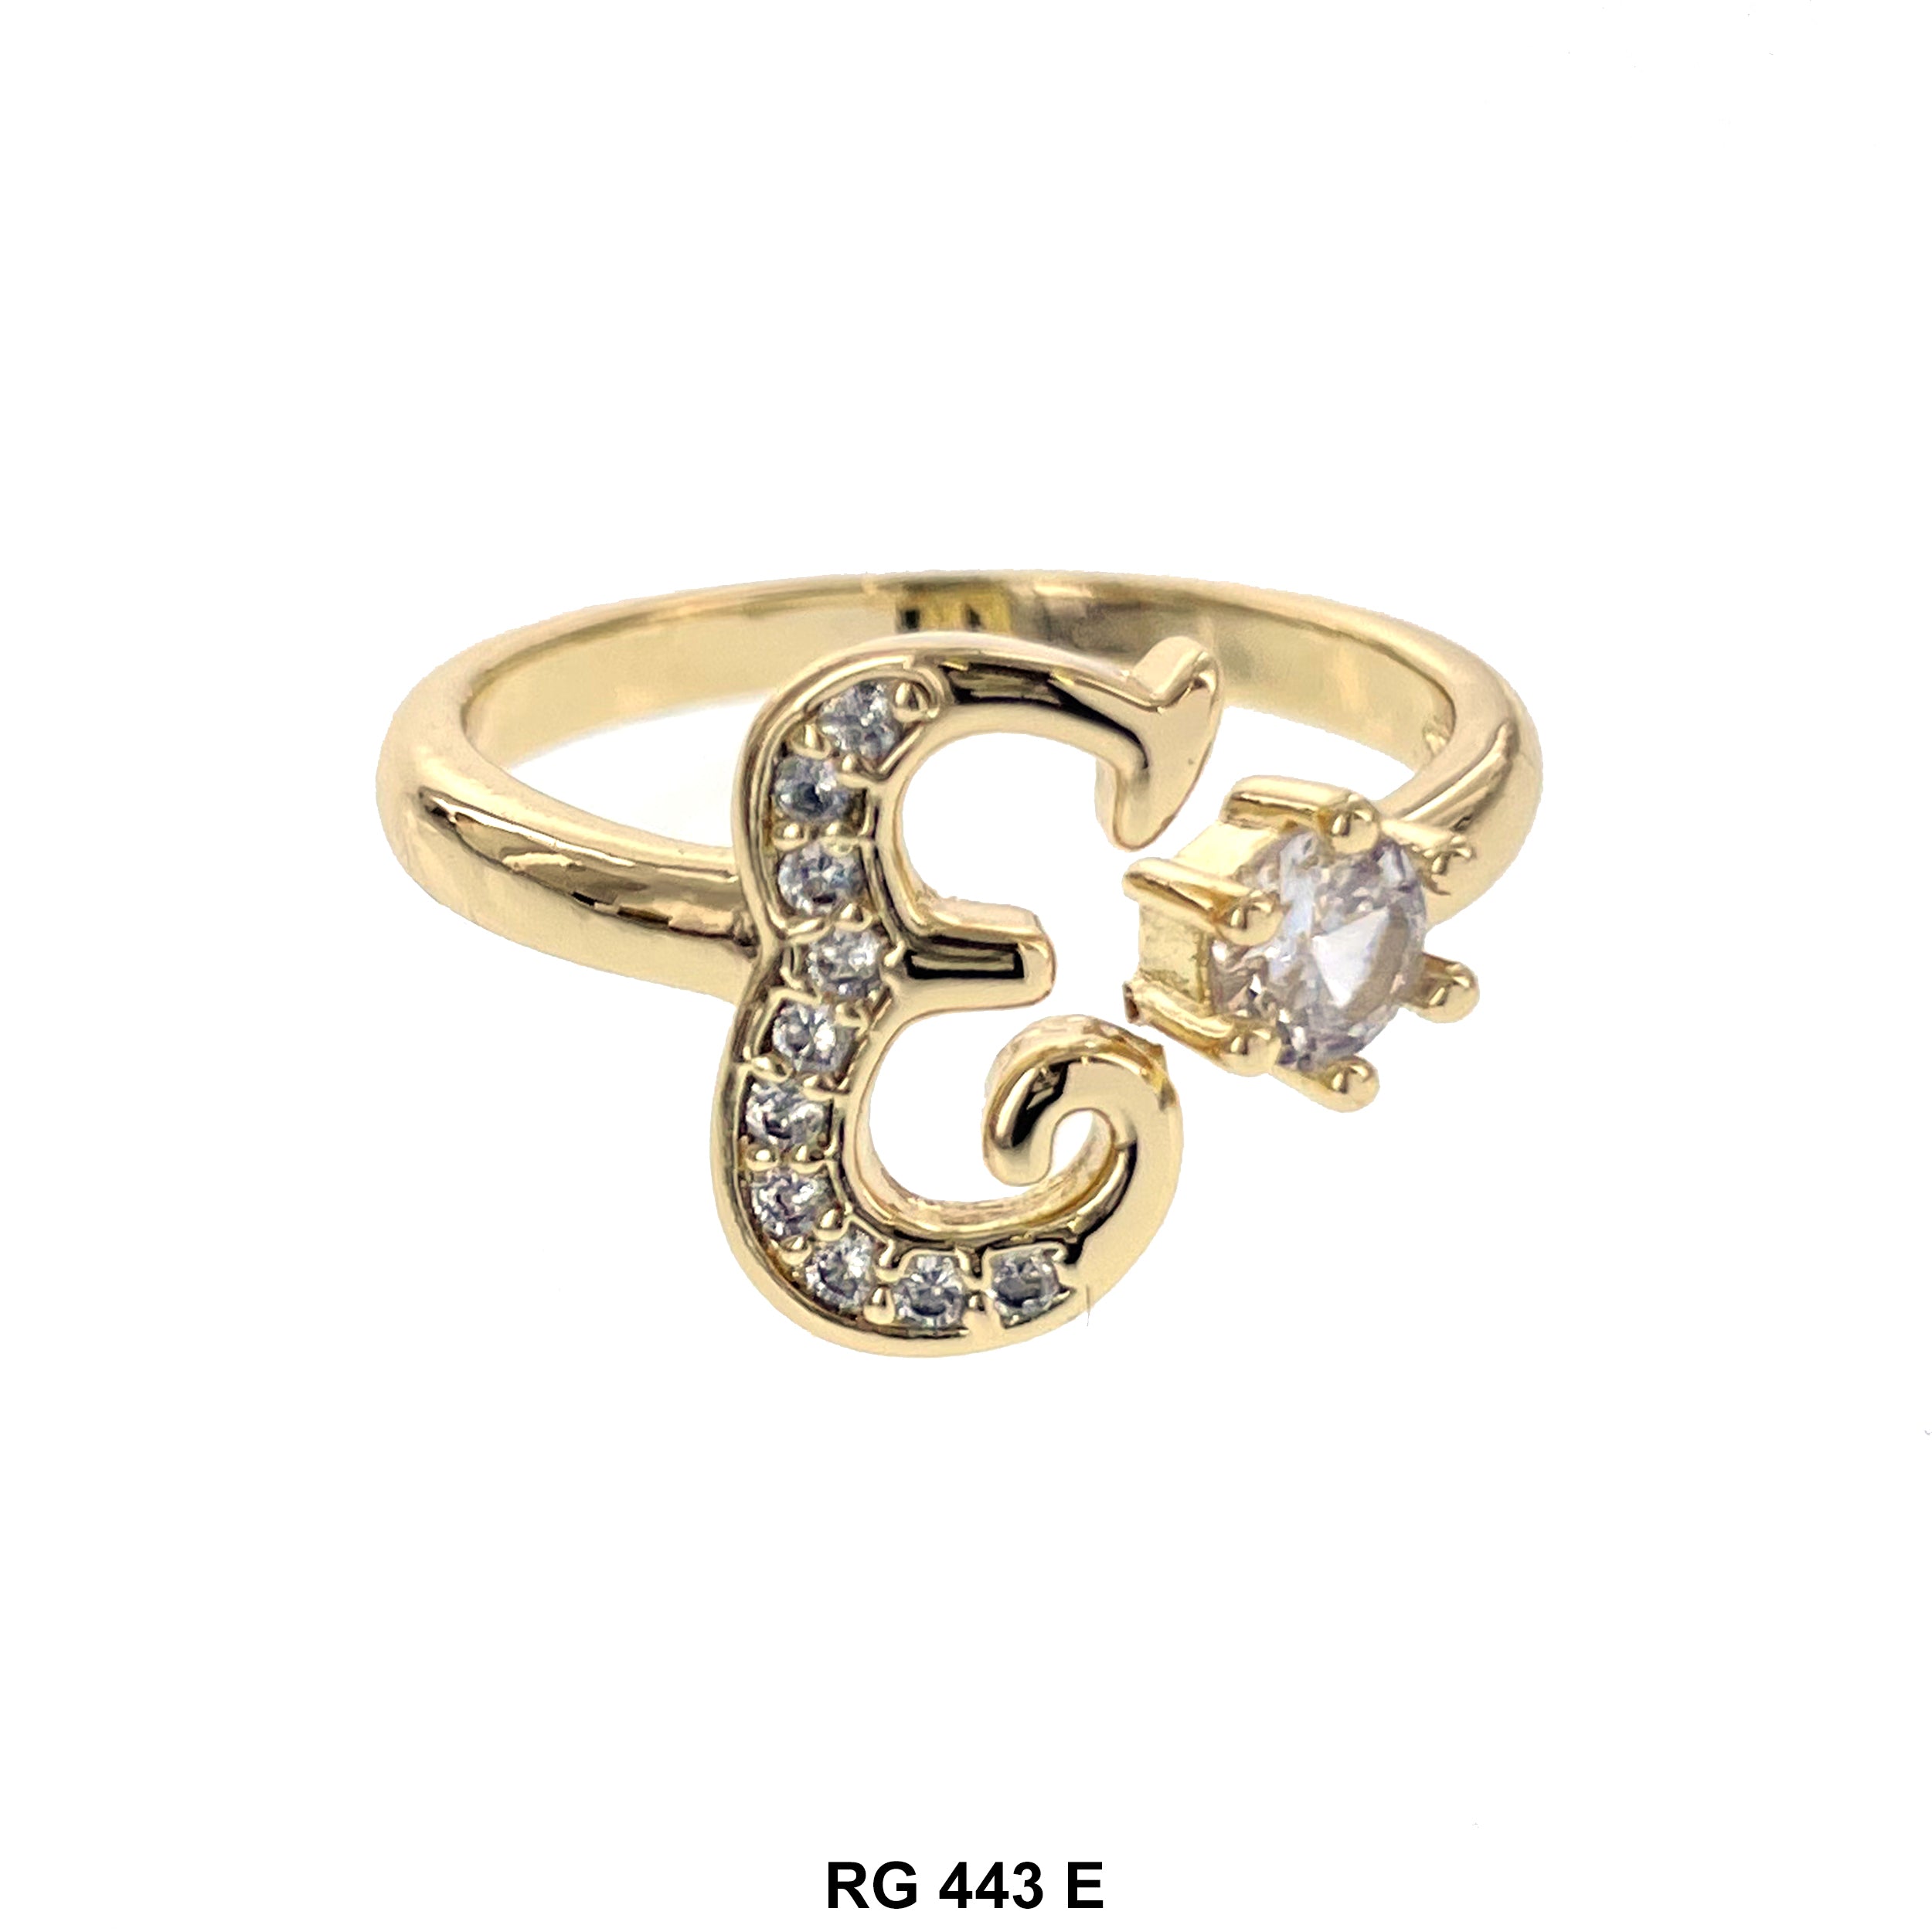 Initial Adjustable Ring RG 443 E